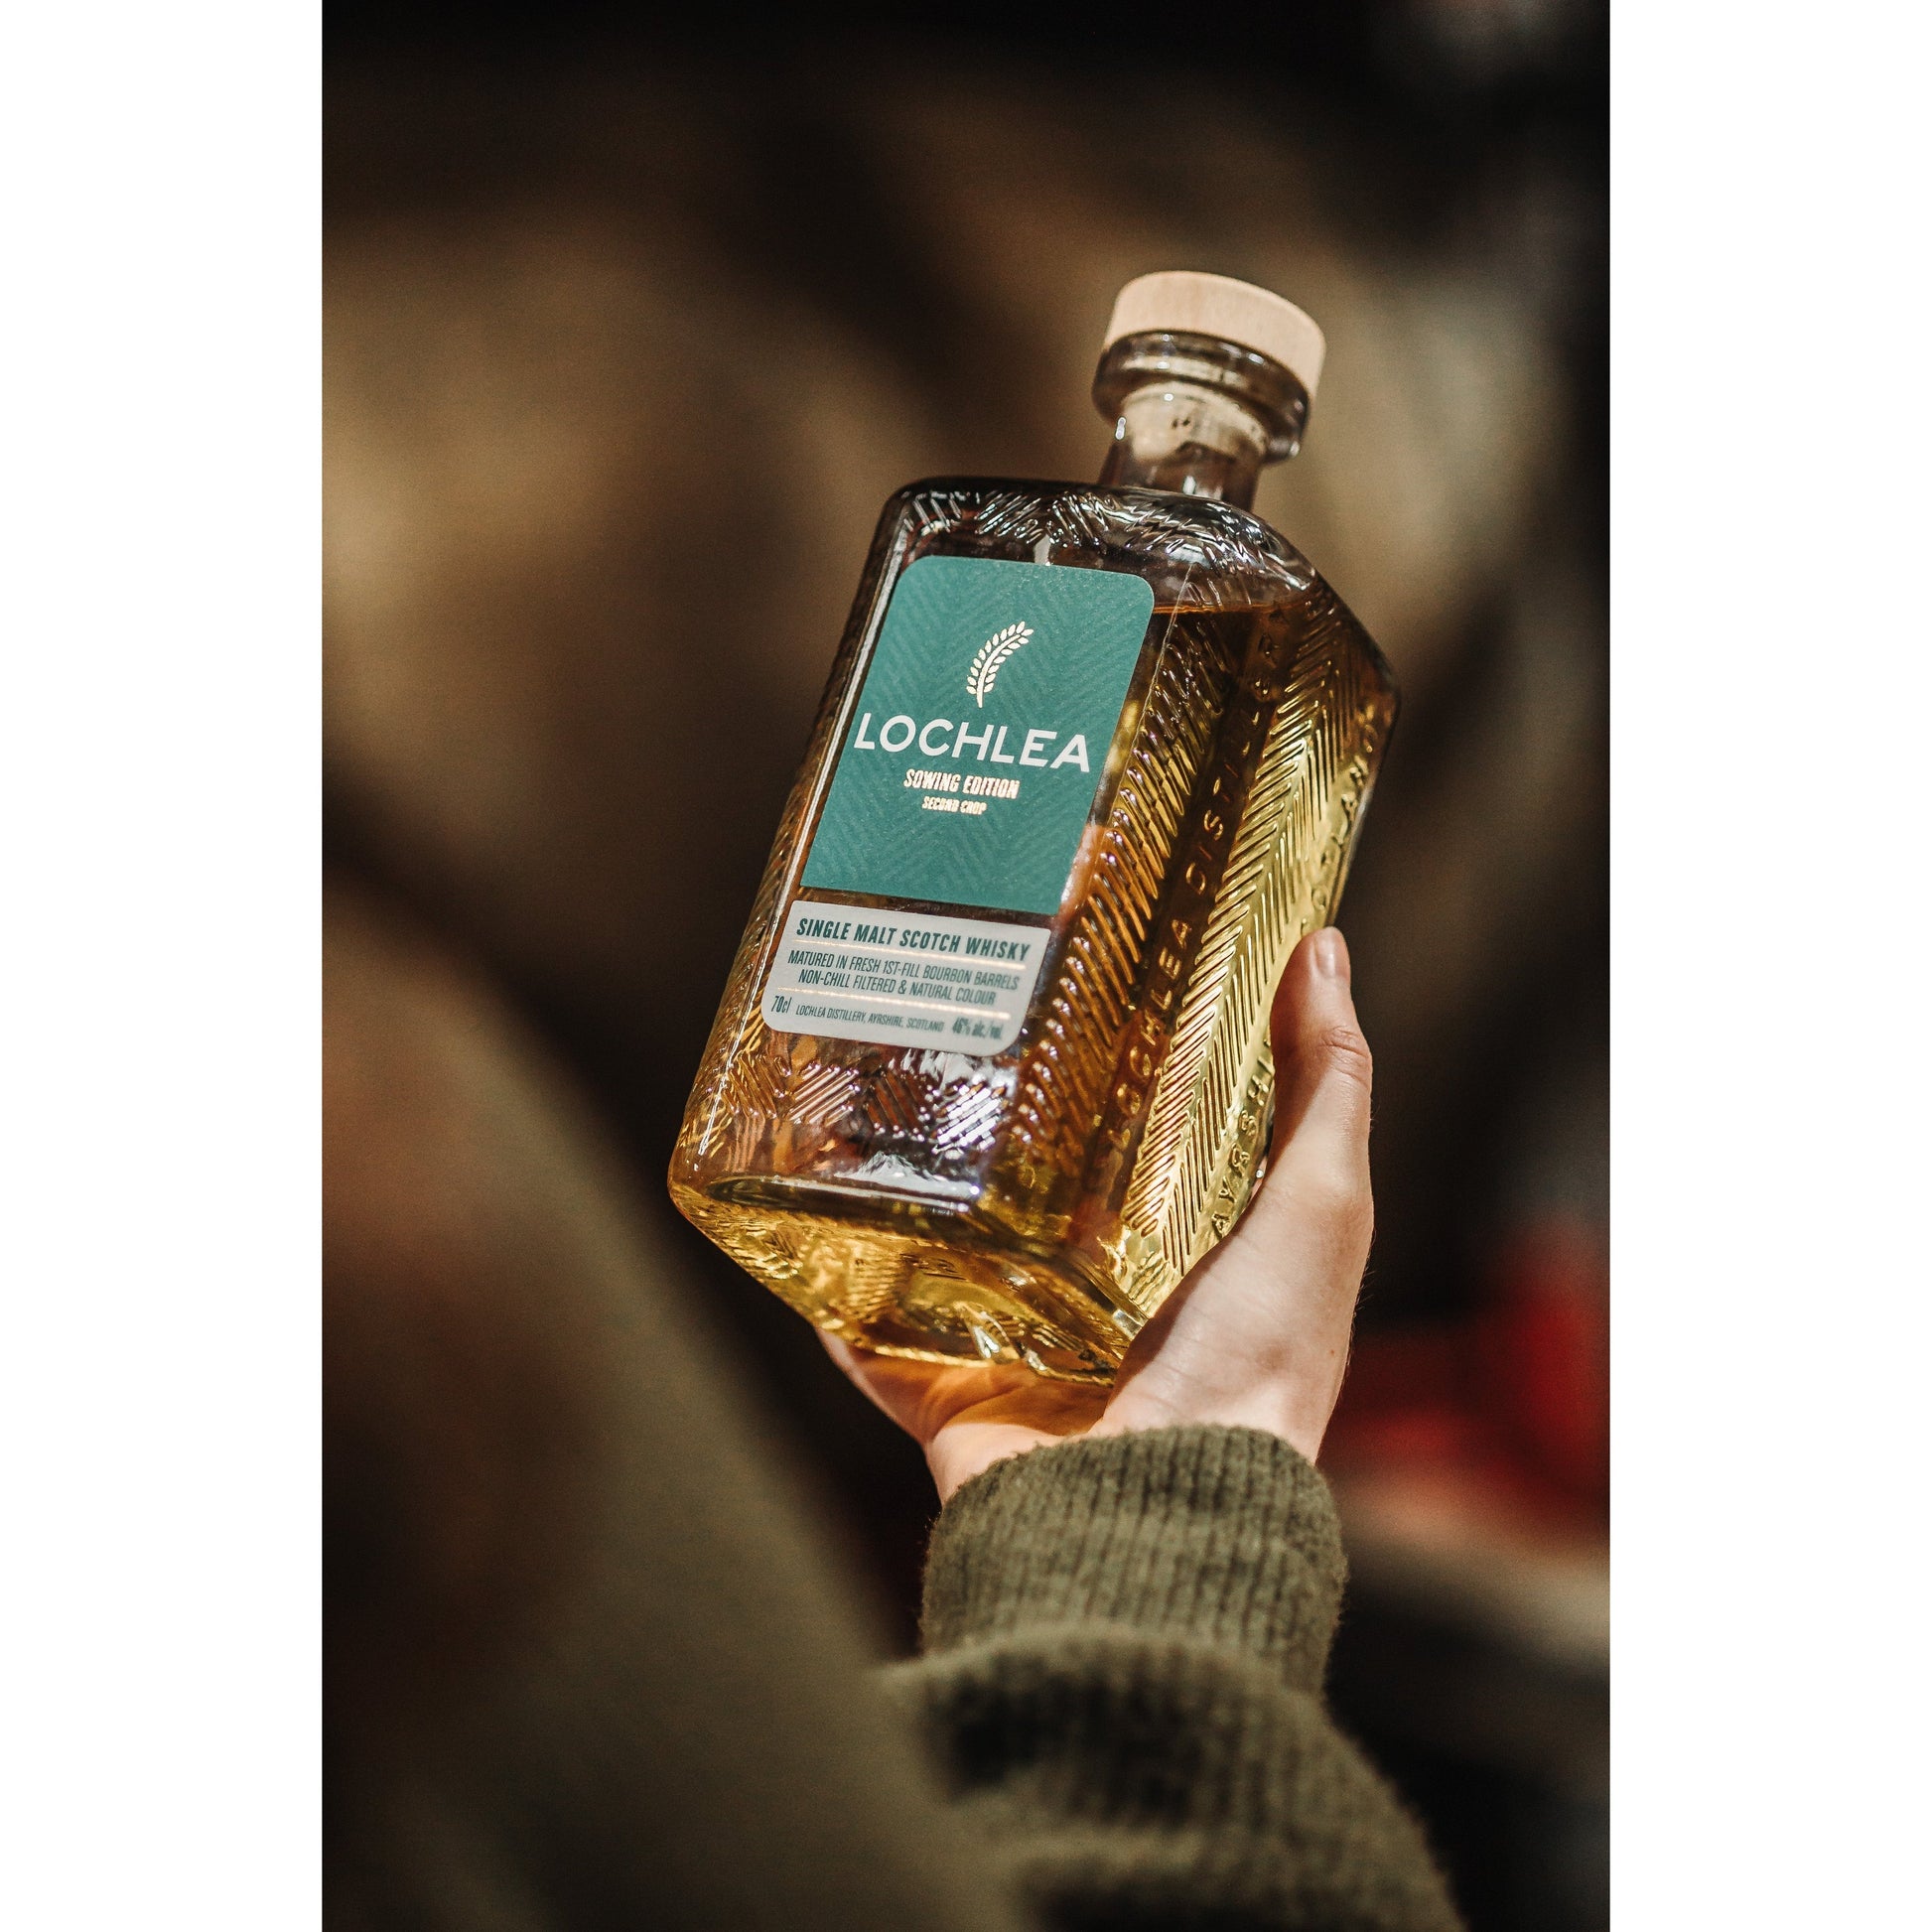 Lochlea Sowing Edition (Second Crop) - Single Malt Scotch Whisky-Single Malt Scotch Whisky-5065008253068-Fountainhall Wines